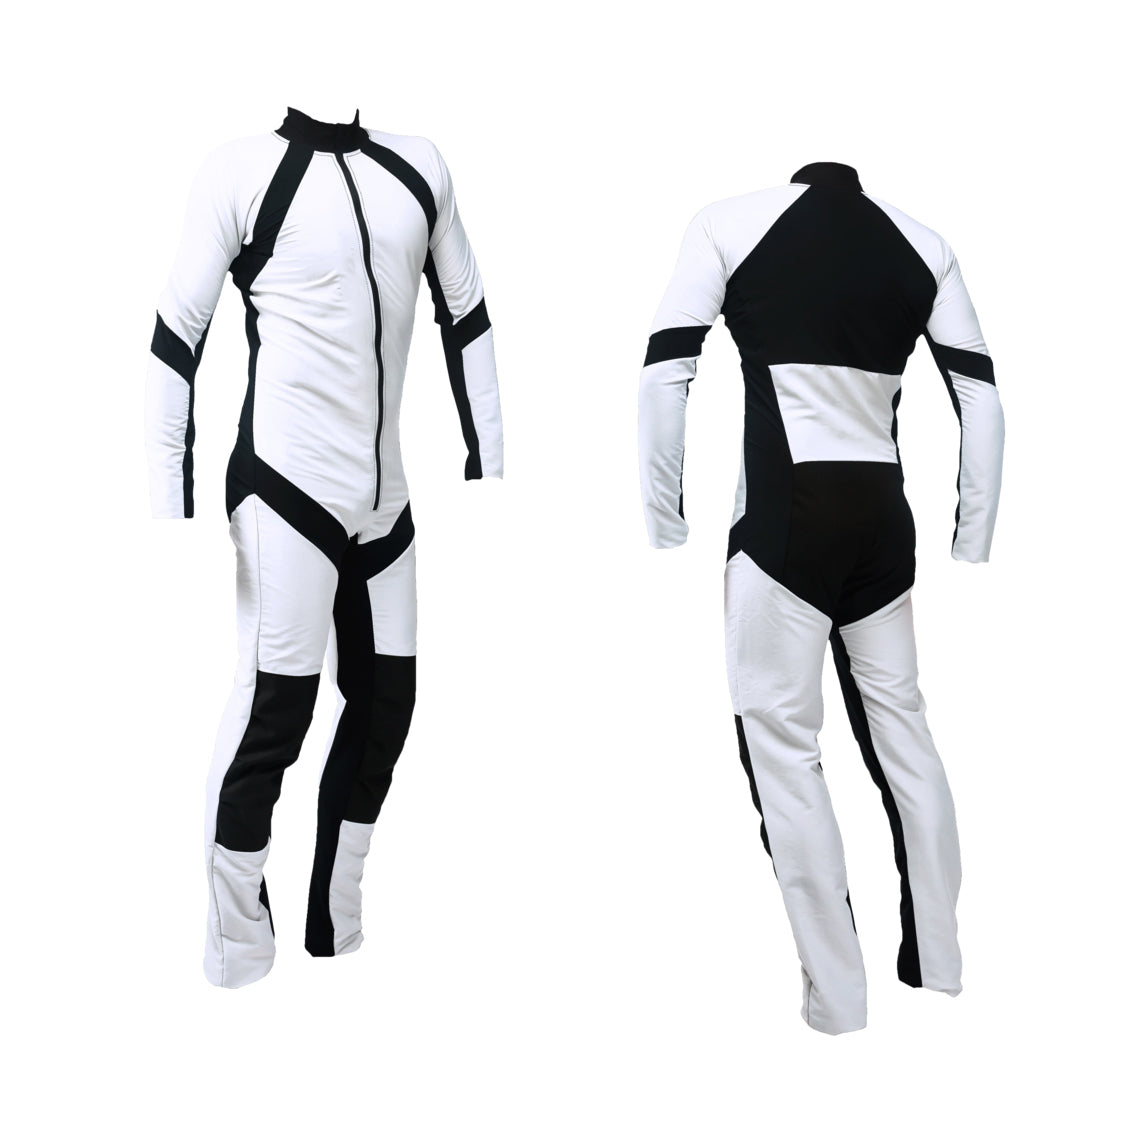 Freefly Skydiving Suit Se-04